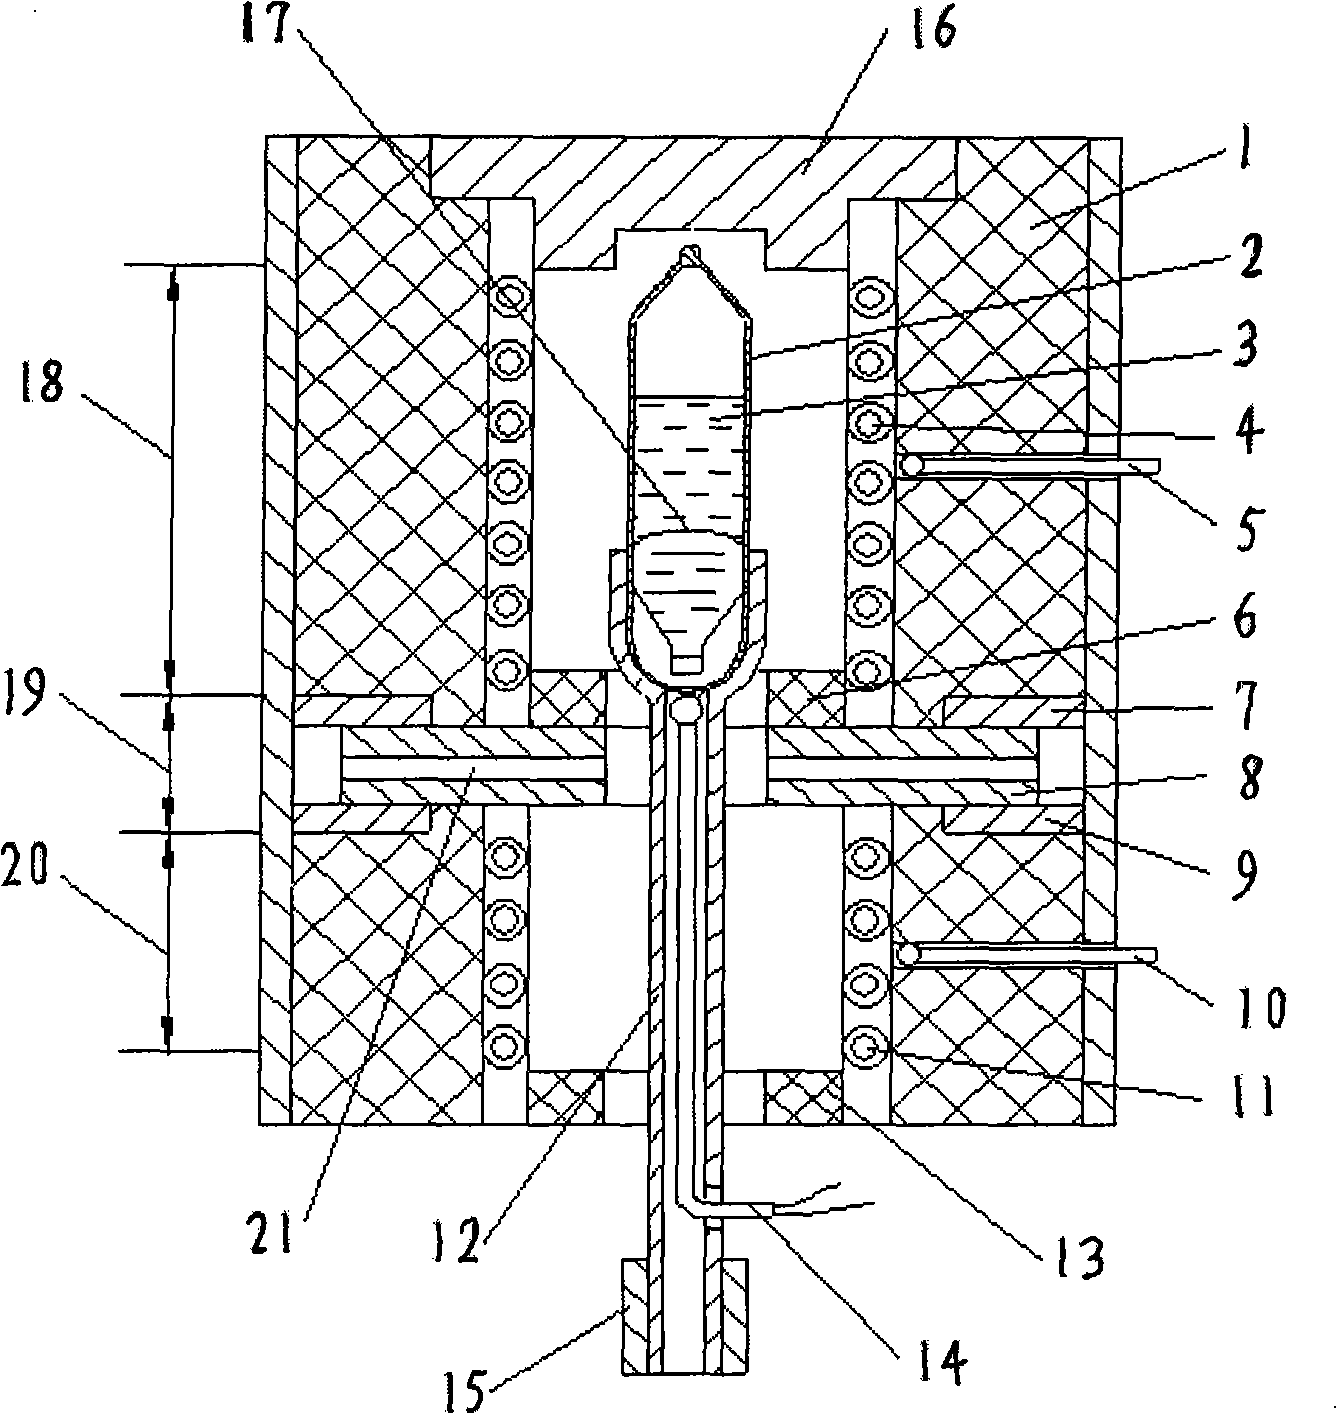 Multicomponent compounds infrared crystal growth apparatus